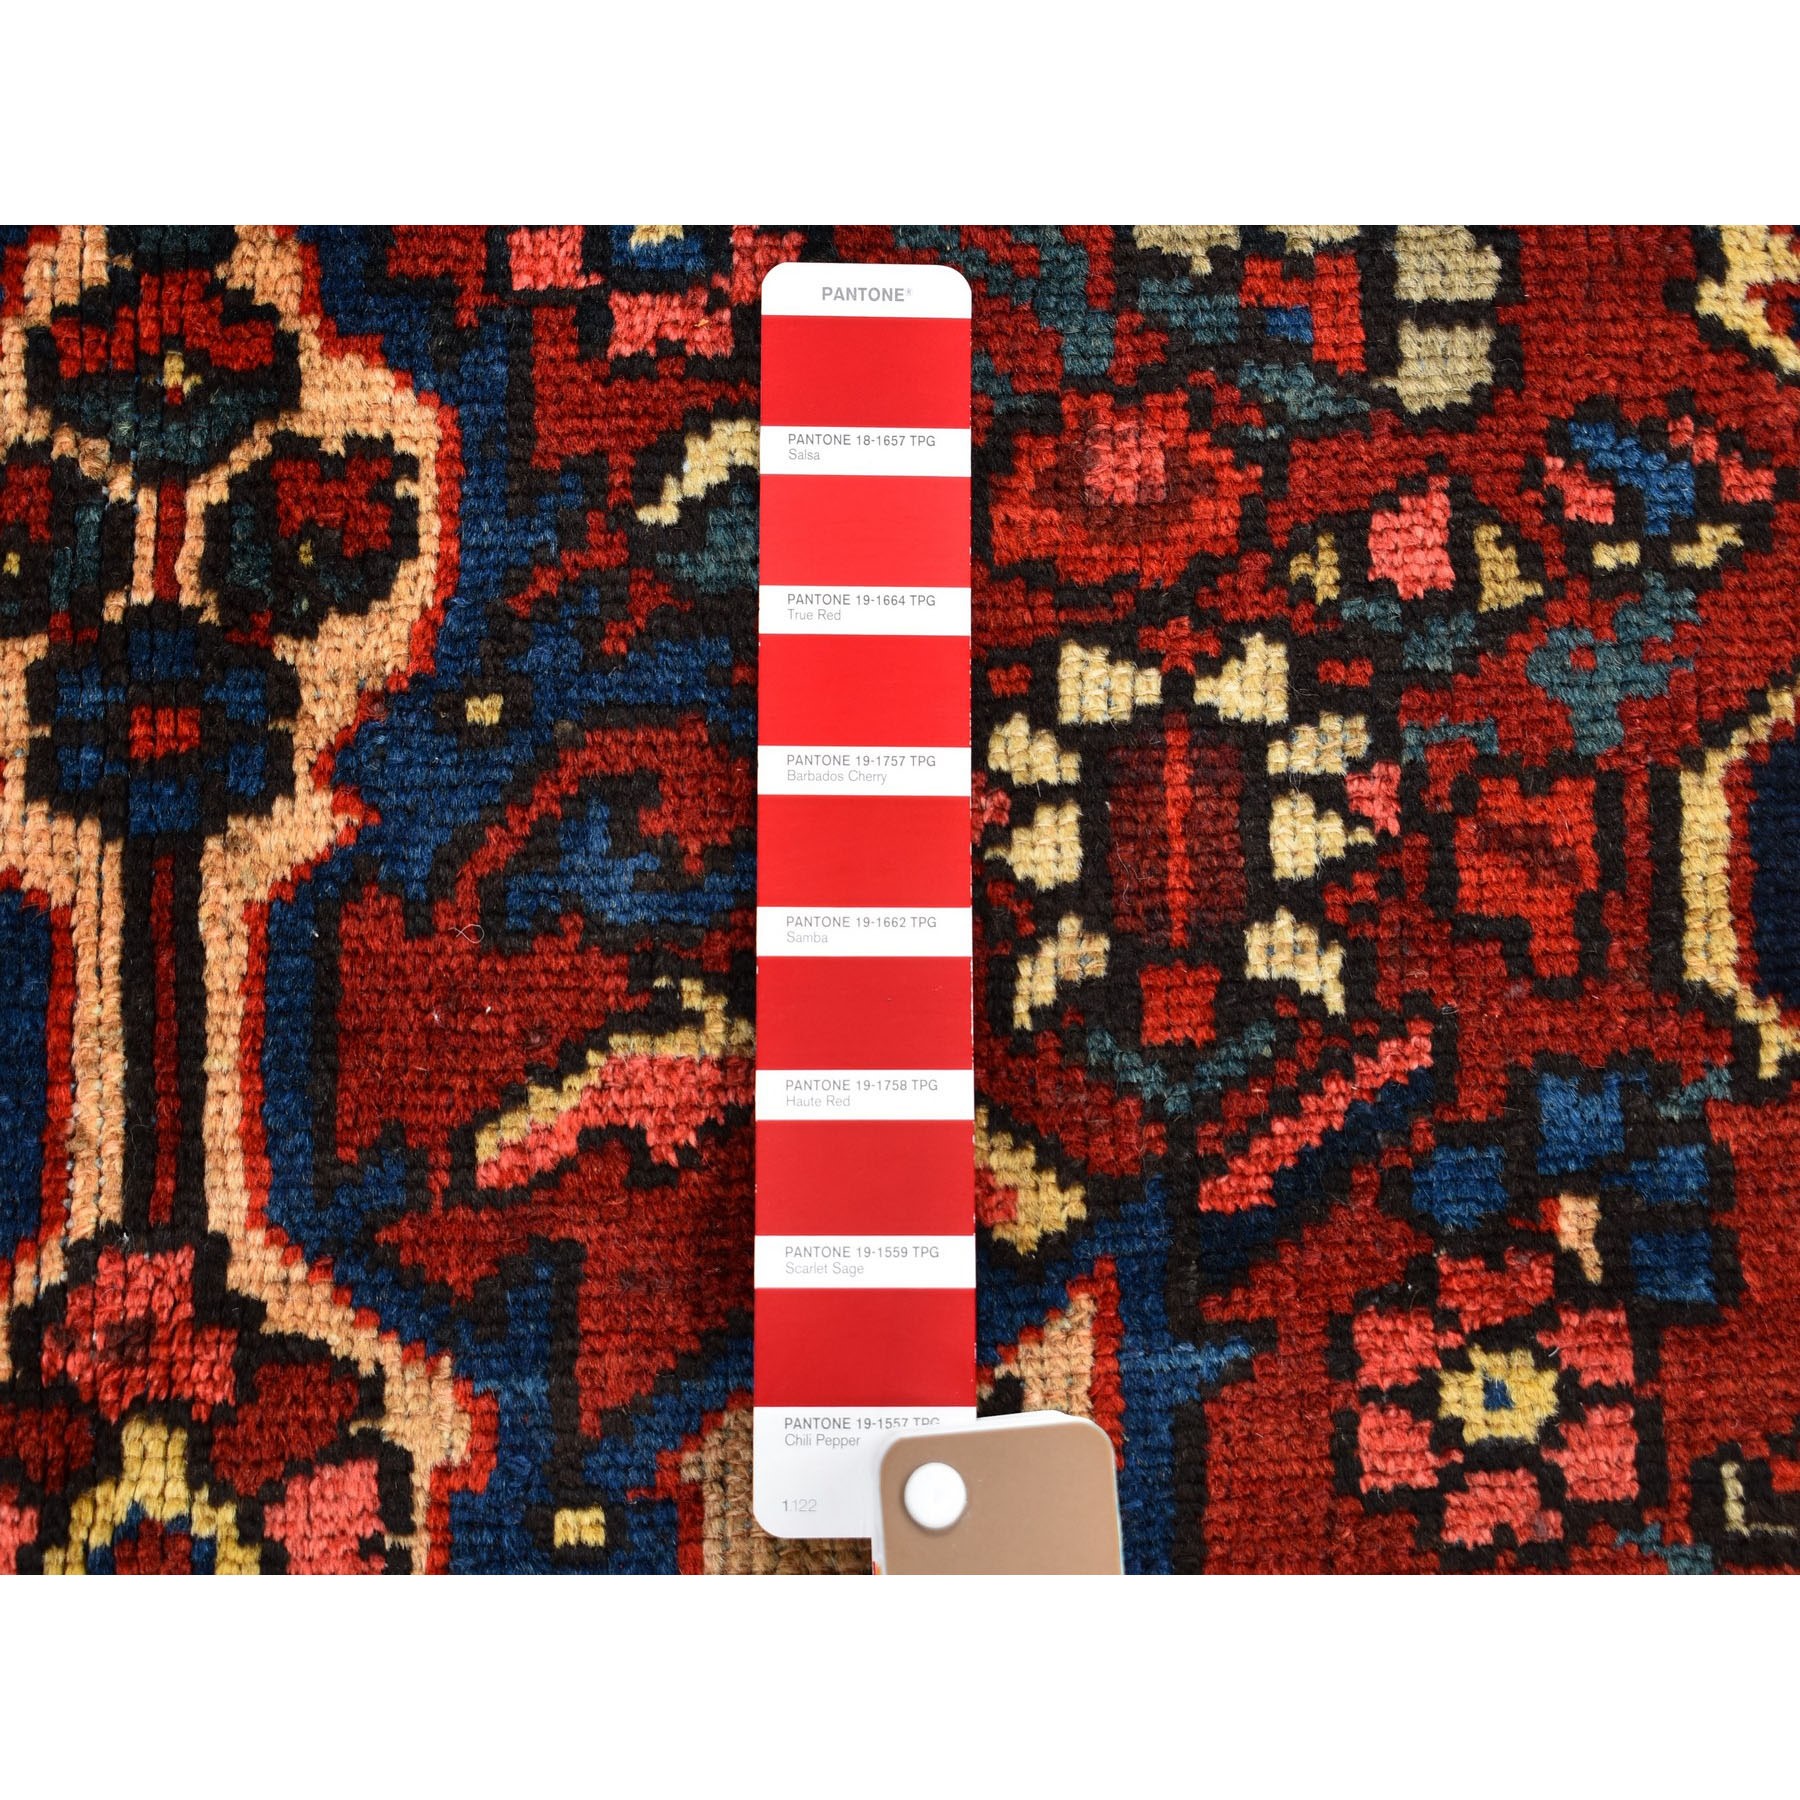 4-3 x6-8  Red Vintage Persian Bakhtiari Even Wear Pure Wool Hand Knotted Oriental Rug 